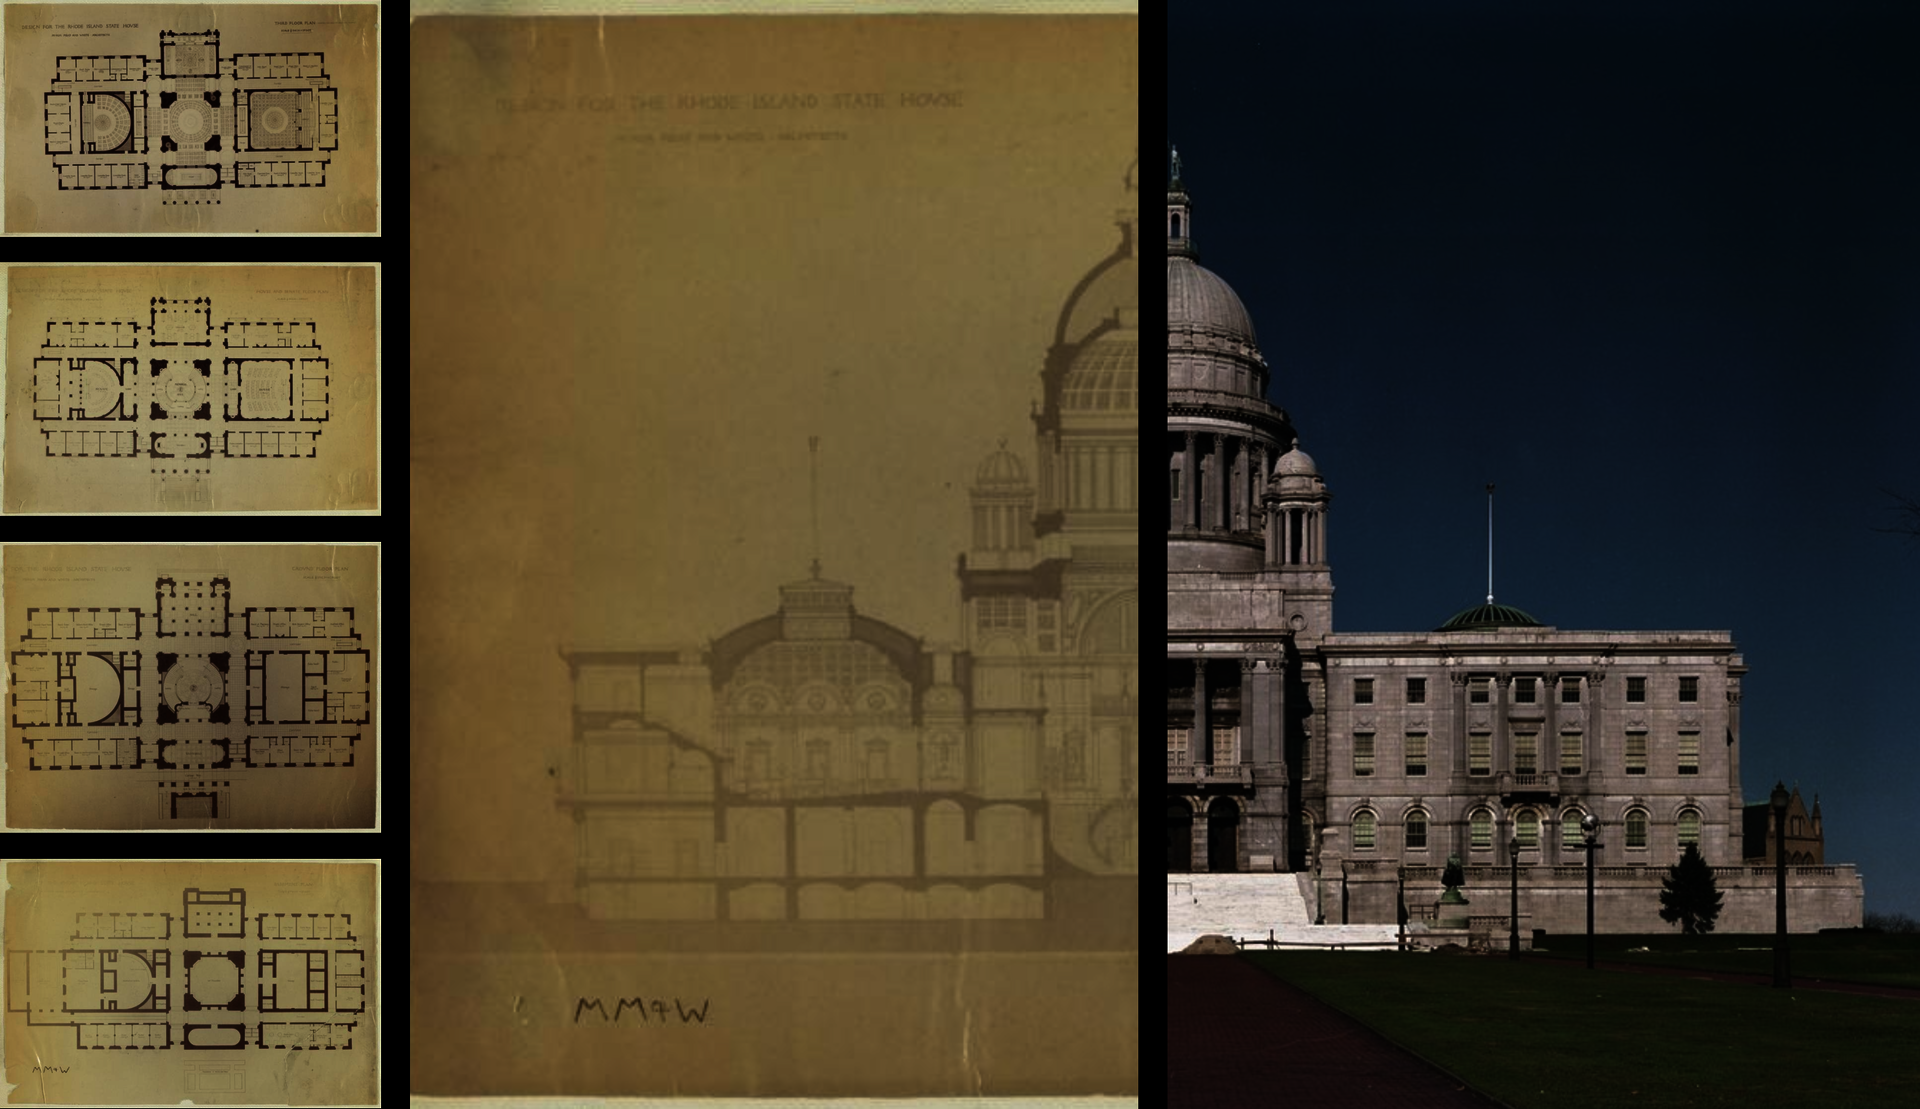 The Providence Statehouse: Designed and Built by McKim, Mead, and White at the apex of an inhabited bluff on the north side of providence, overlooking the city.